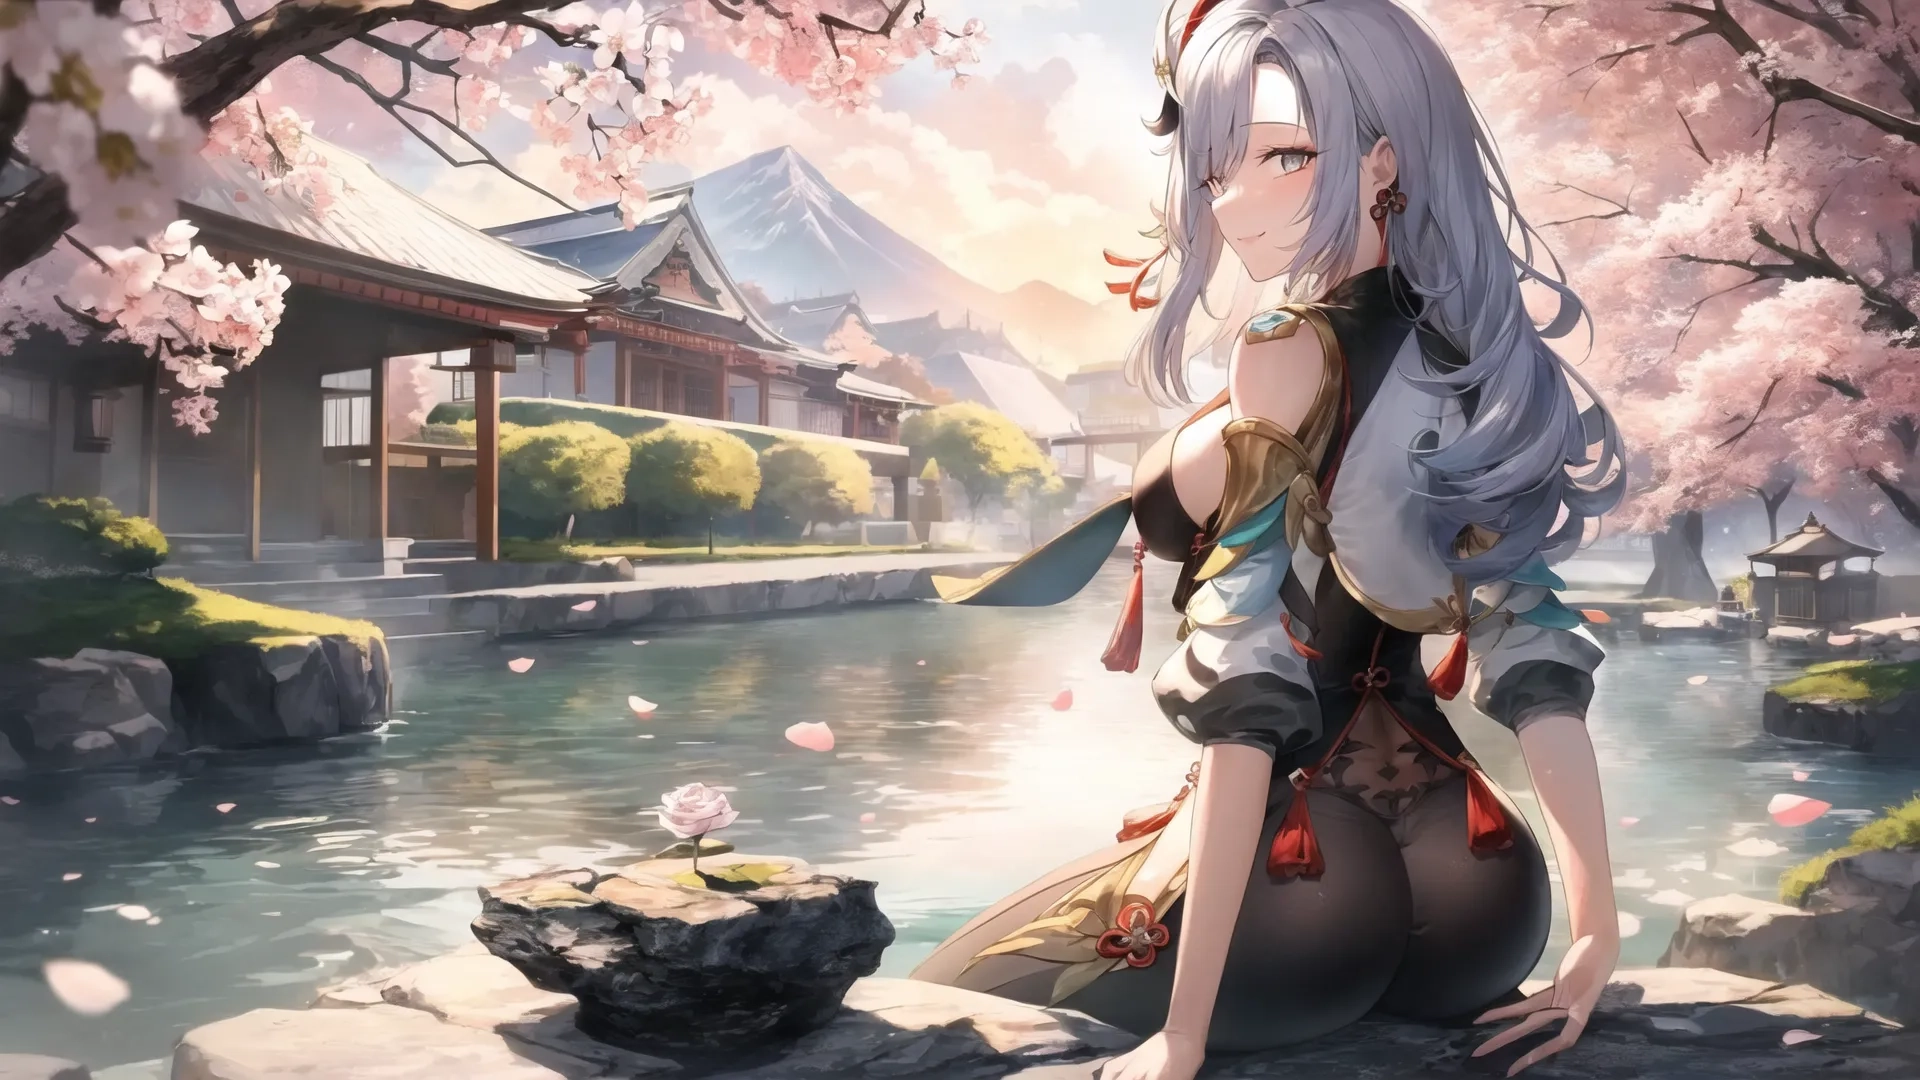 woman in black dress sitting next to a pond and trees in blossom trees with flowers behind her, wearing a gray and white long hair, long - haired ponytail
